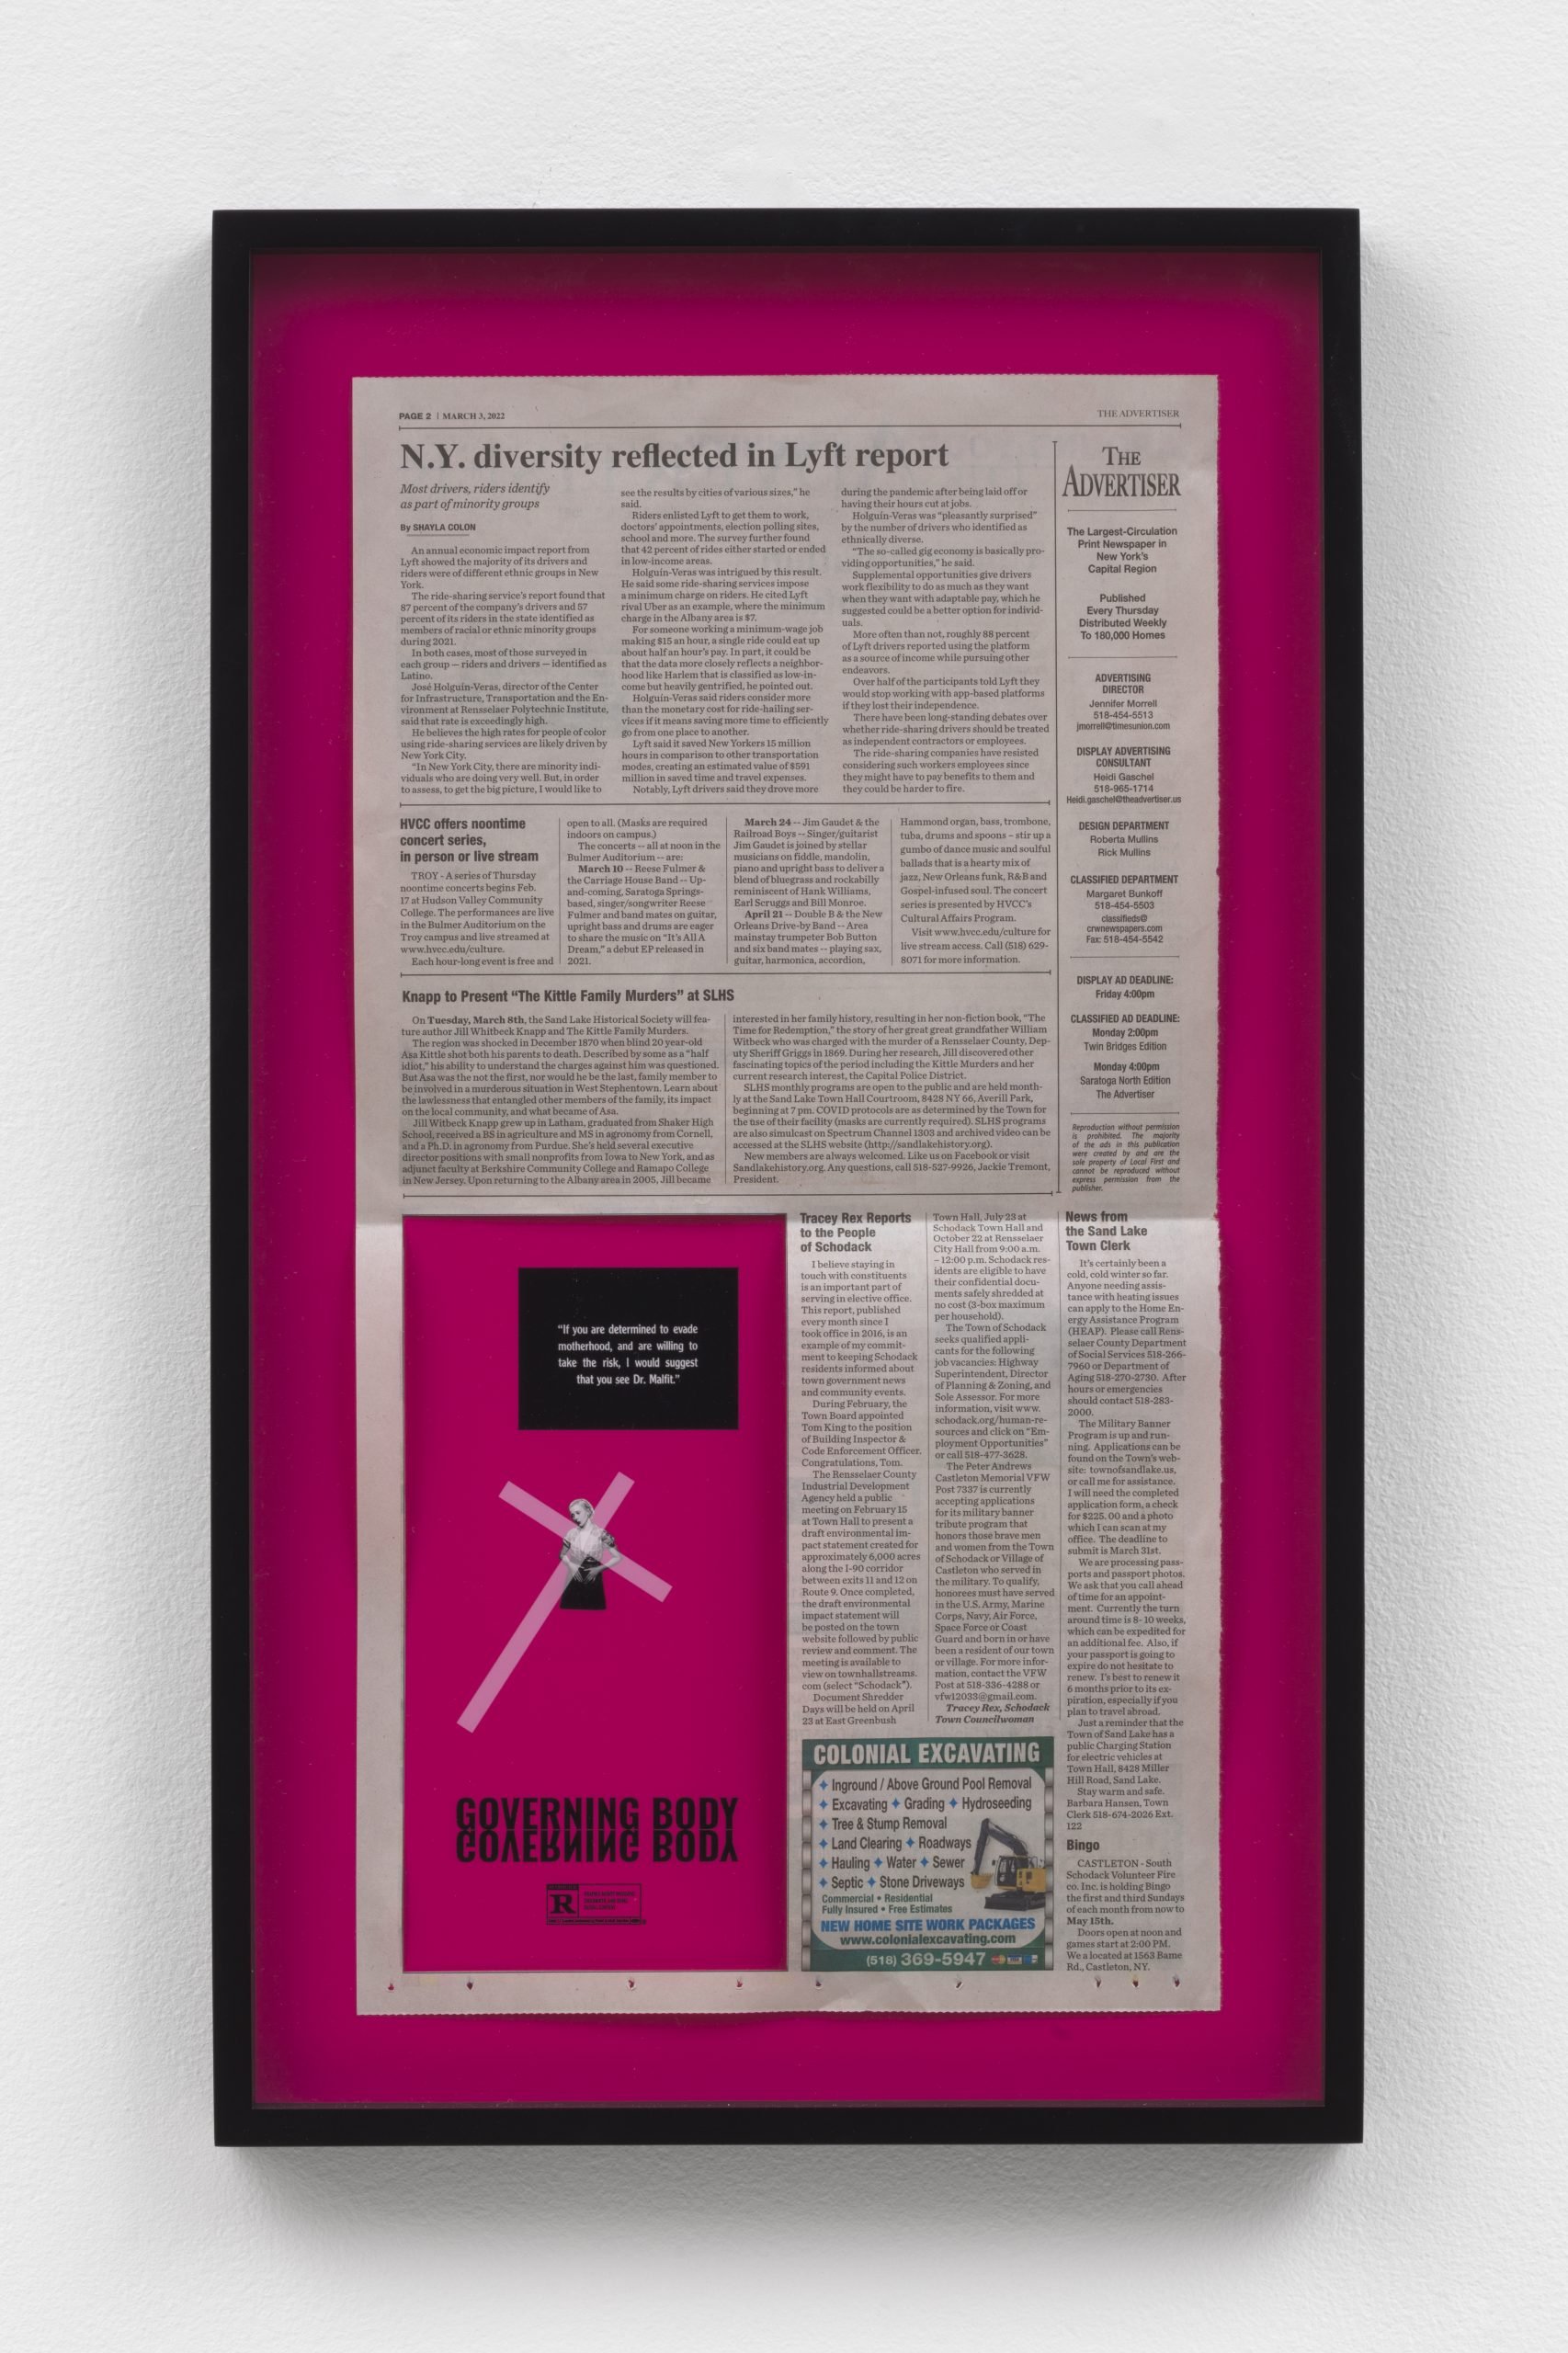   My editor reviewed the ad and we can’t run this in our publication. Good luck with the project. , 2022 Newspaper, poster, and plaque 23 x 13 inches&nbsp;     ABOUT MOTION PICTURE DIVISION   